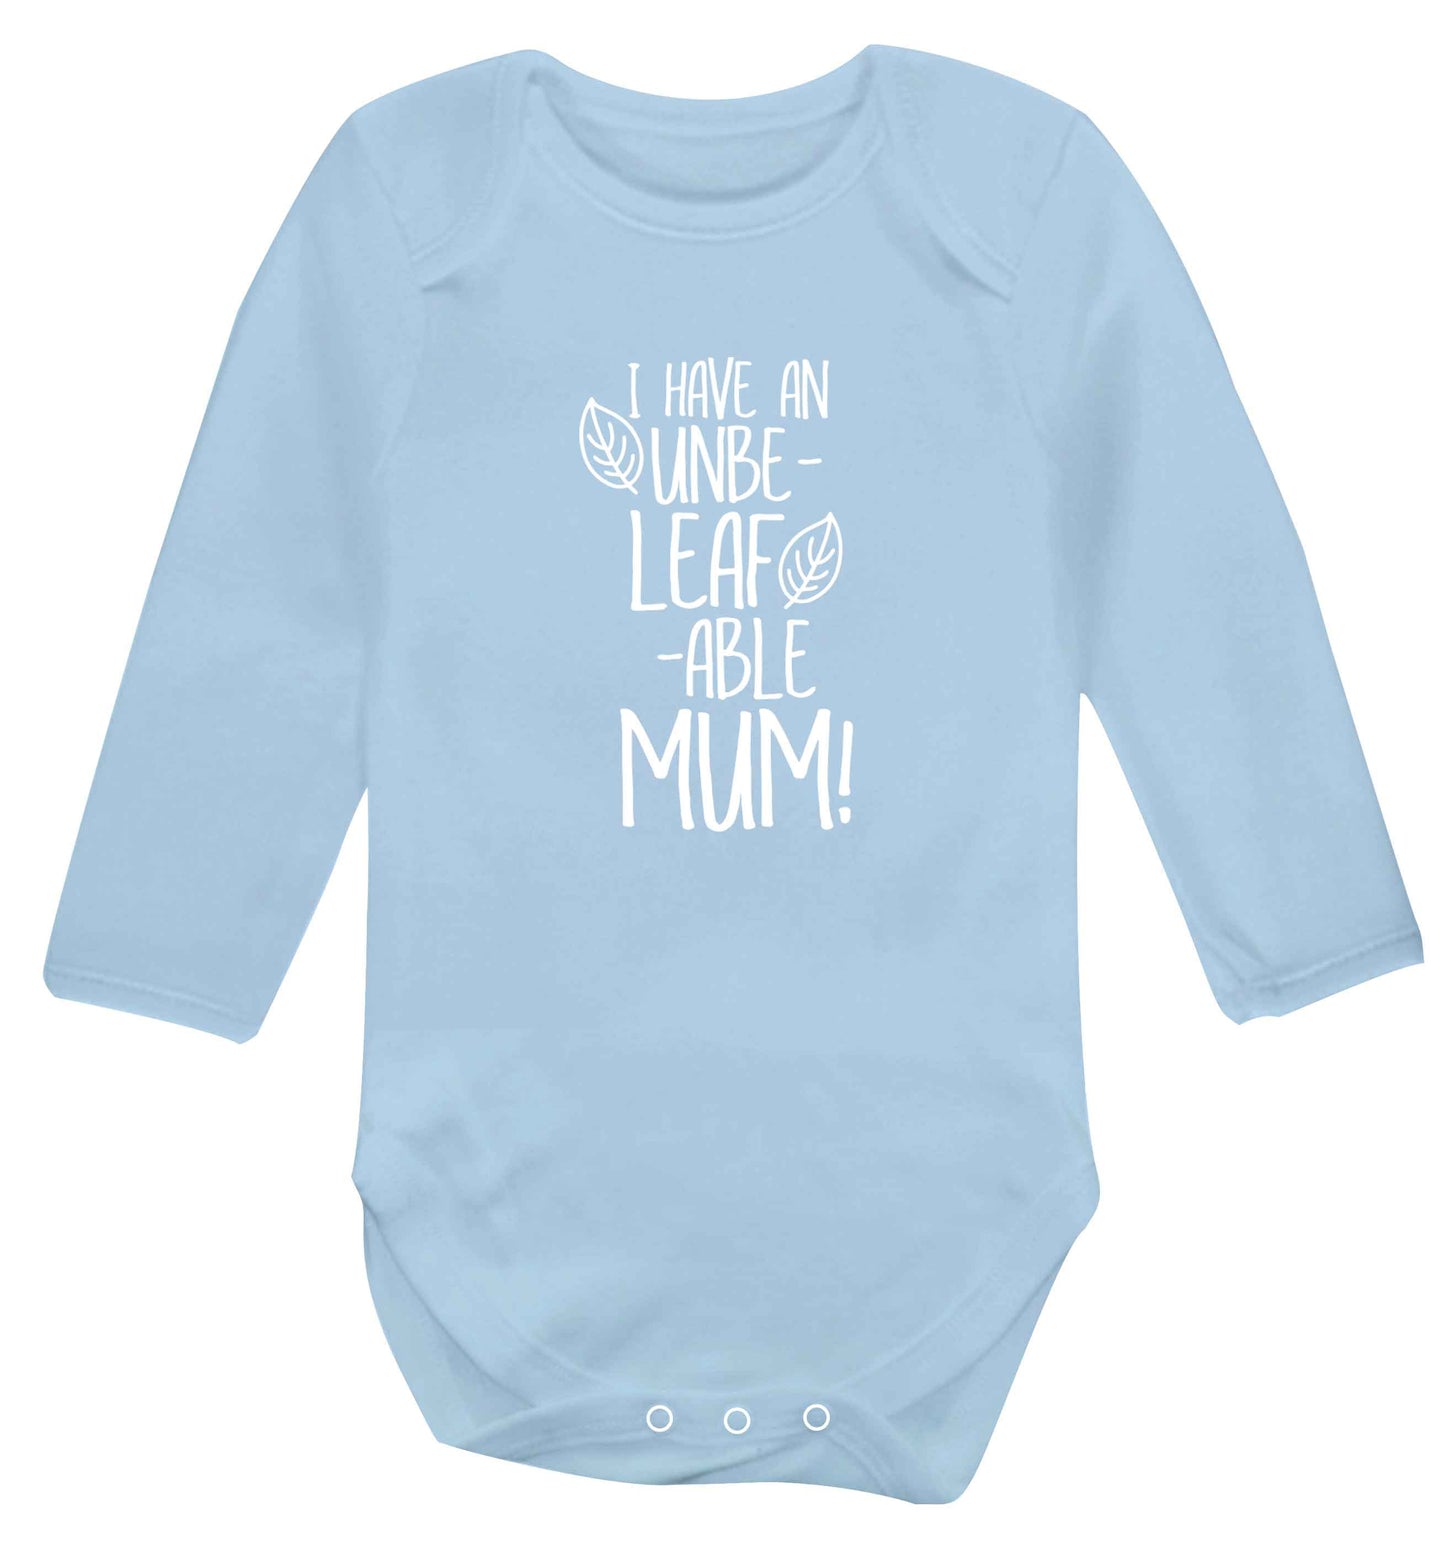 I have an unbeleafable mum! baby vest long sleeved pale blue 6-12 months